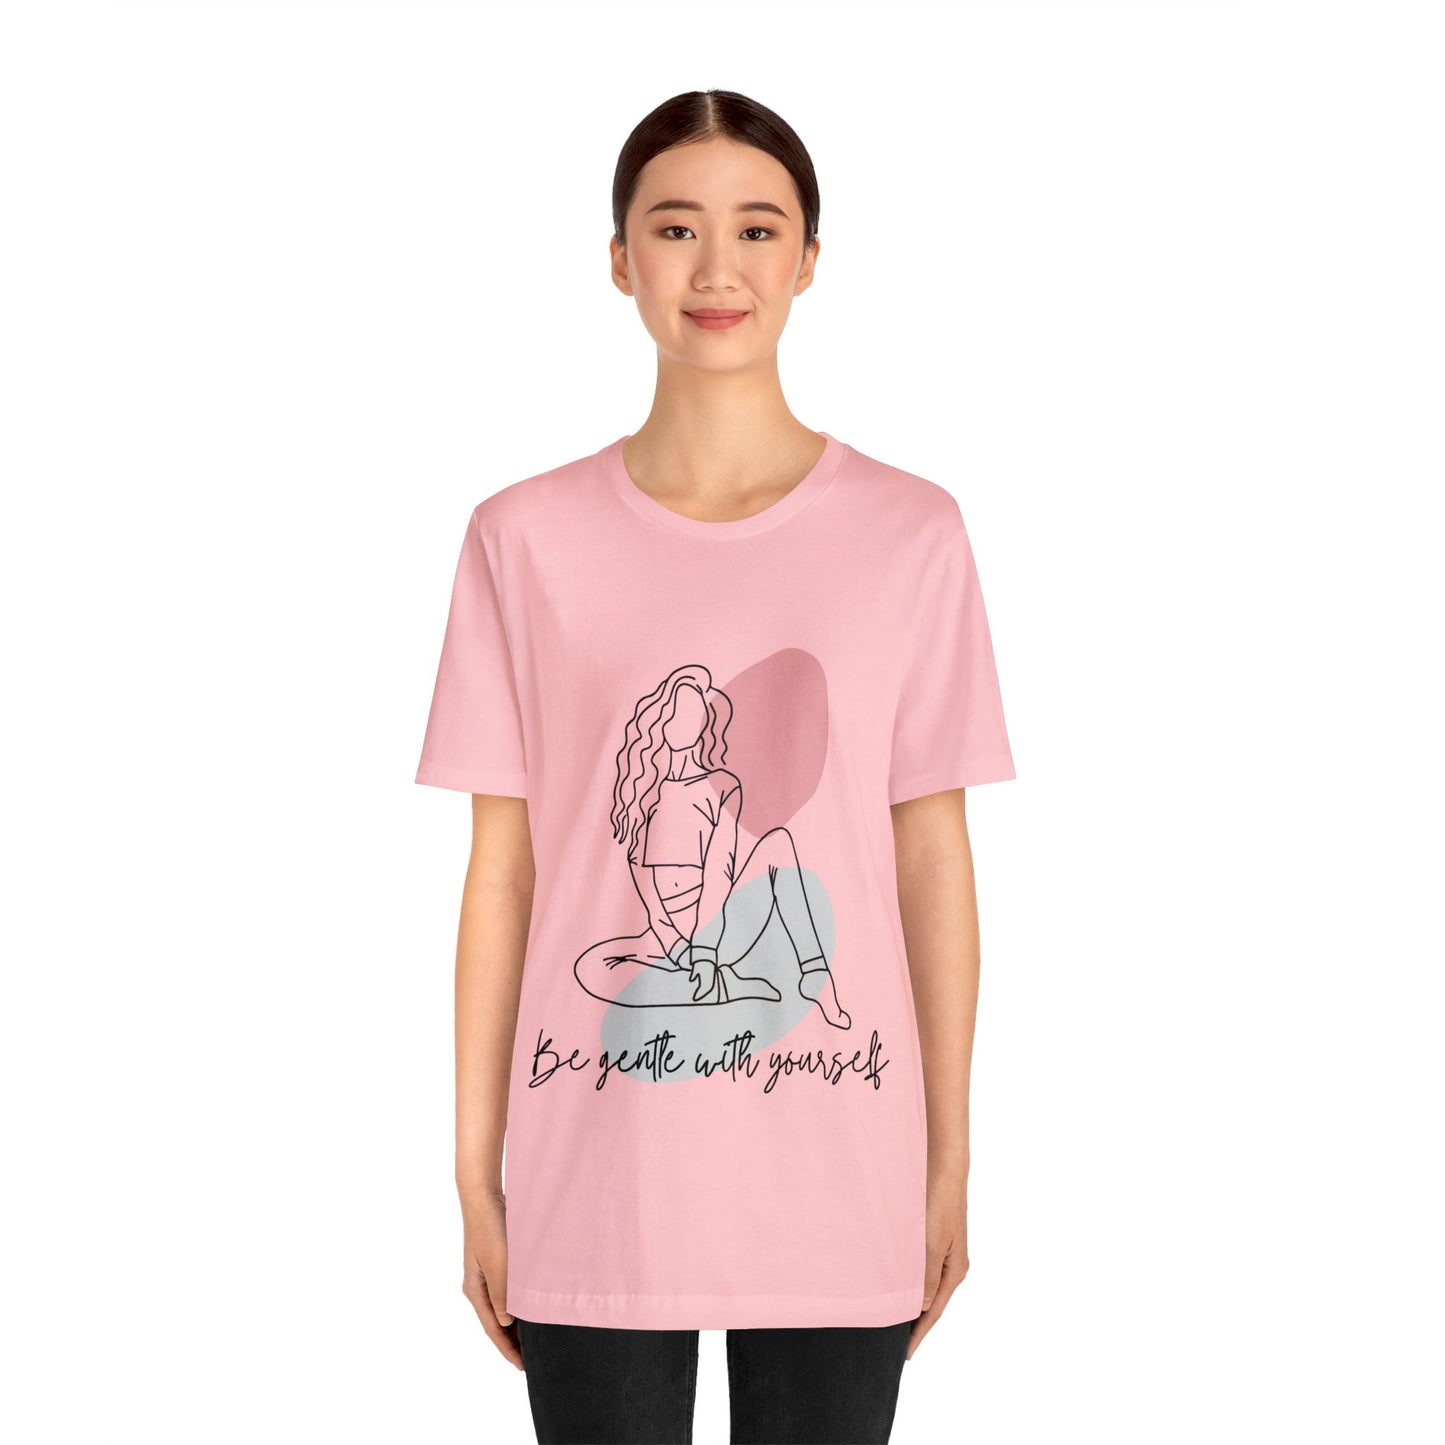 Be Gentle With Yourself - Inspirational, Motivational T Shirt For Women